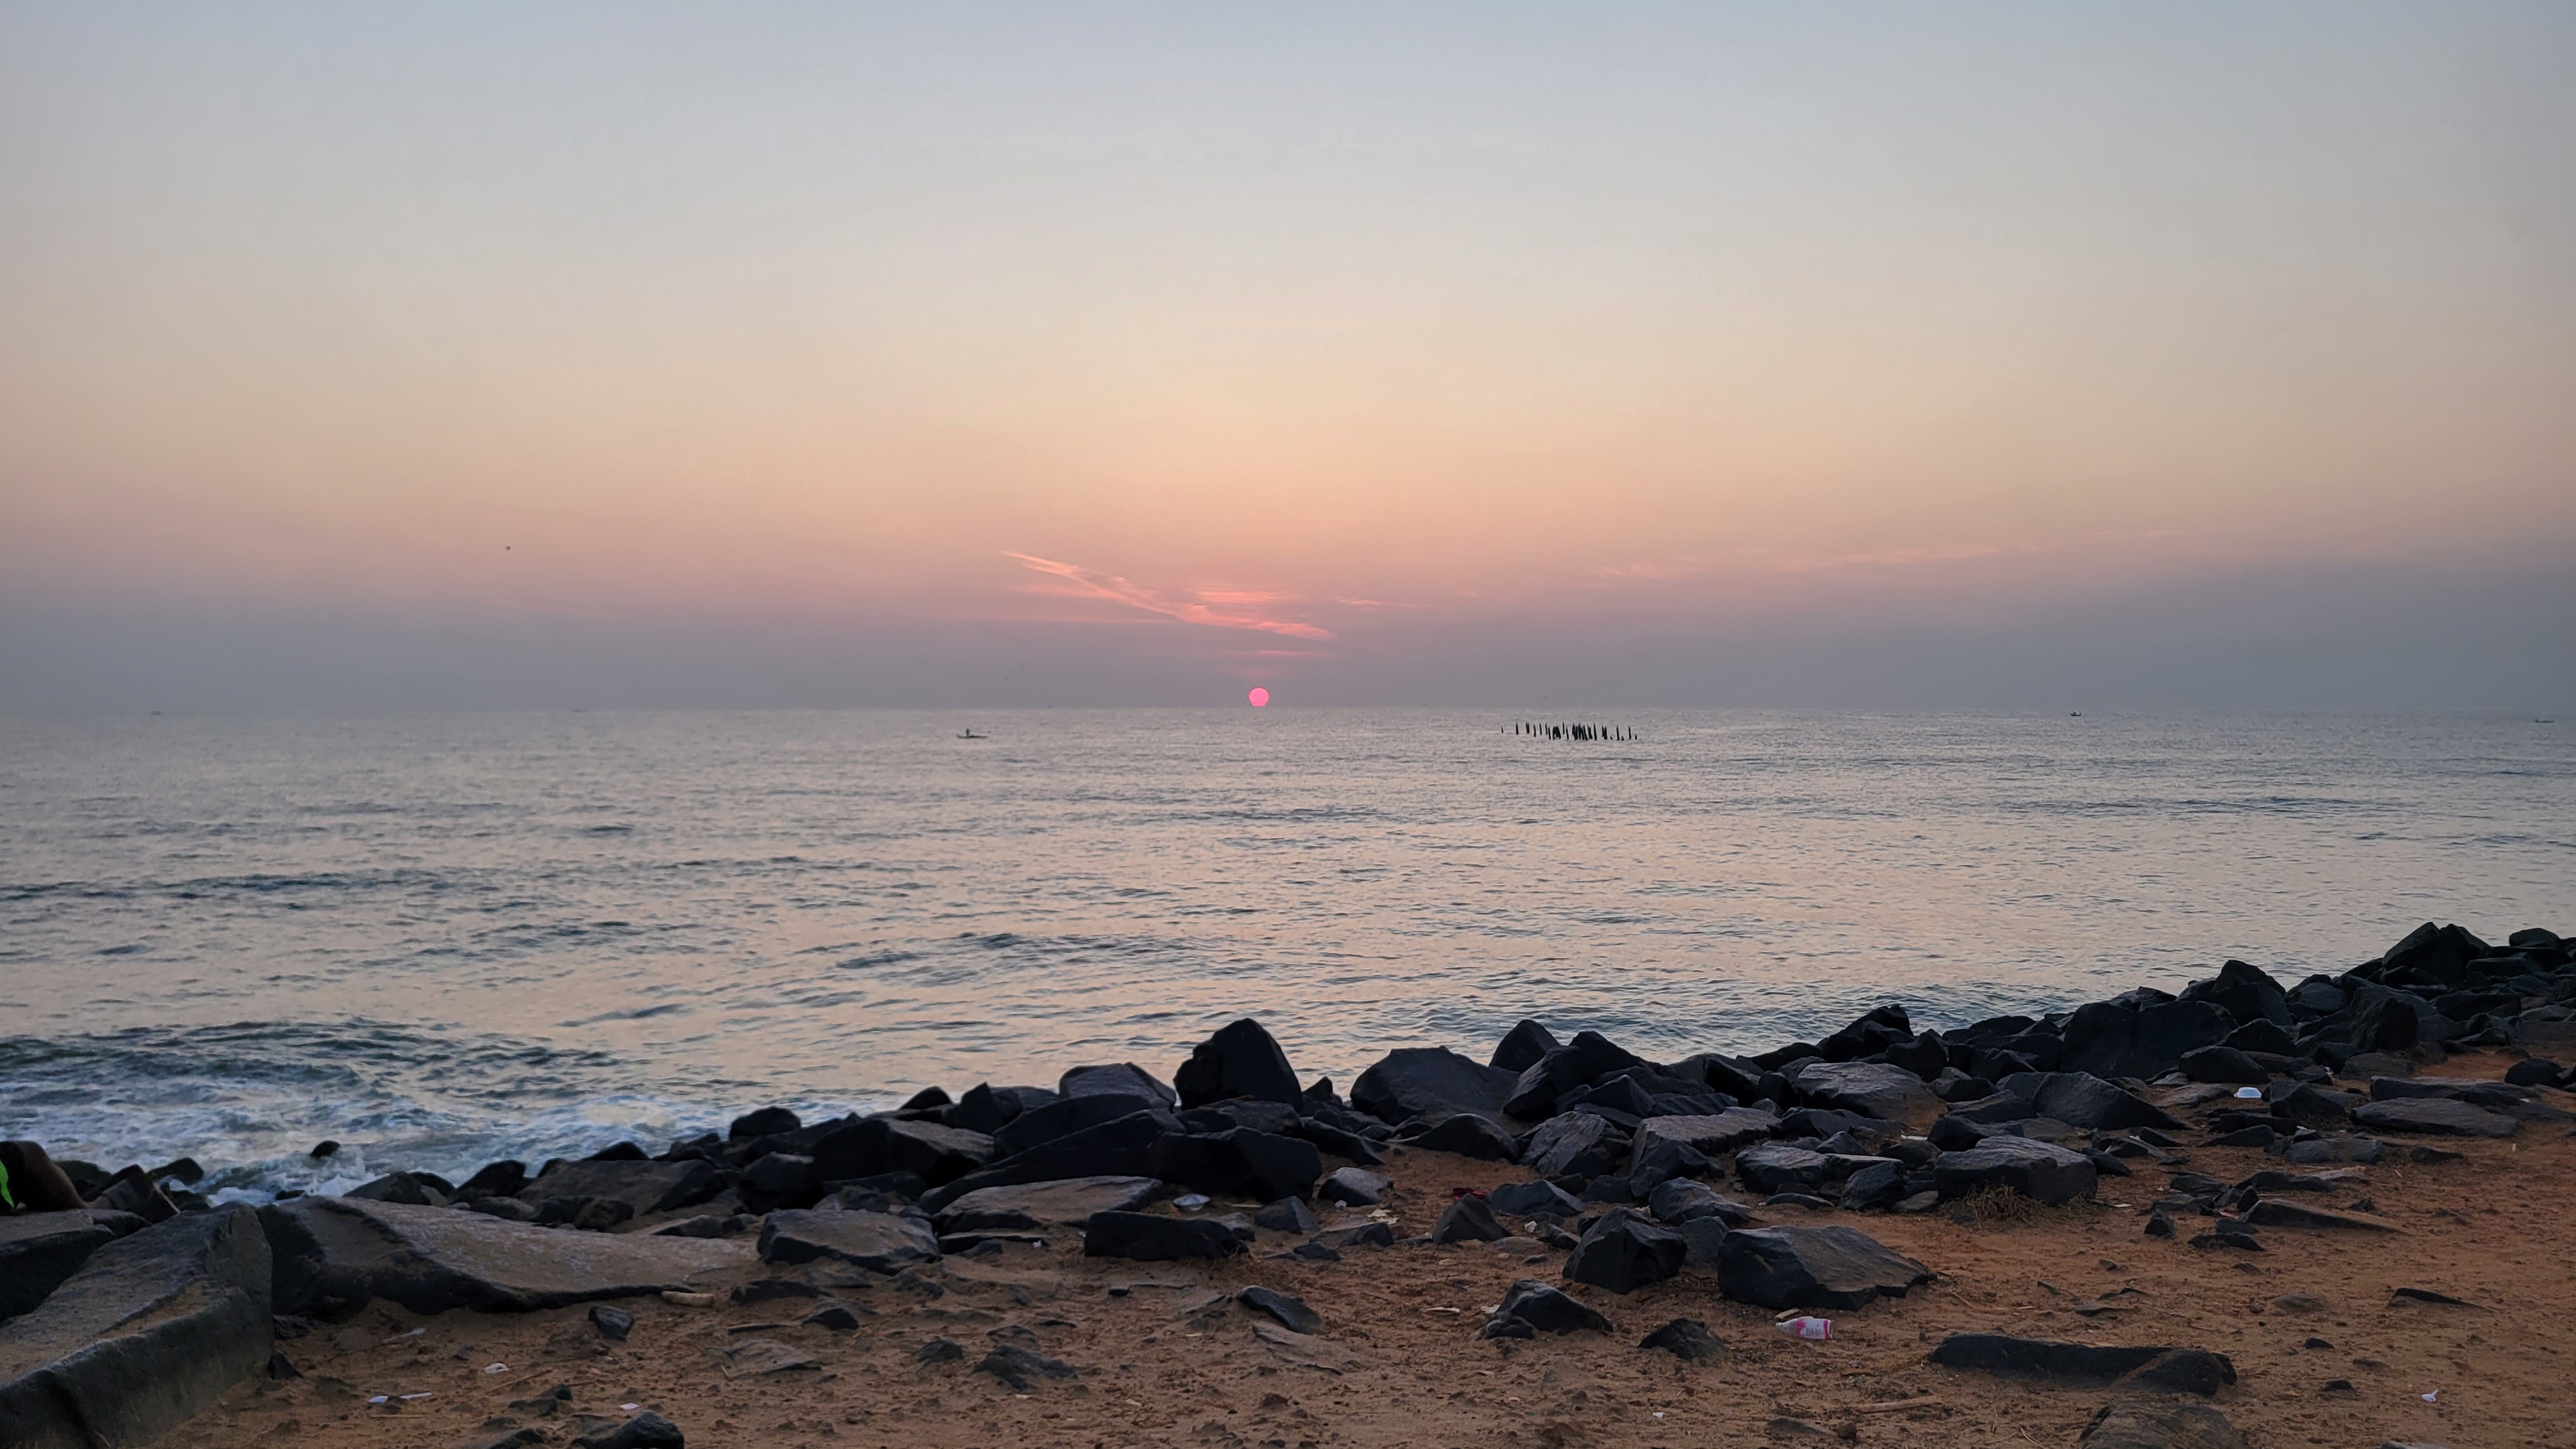 The orange orb of the sun peeking up as it rises from the waters near Pondicherry.